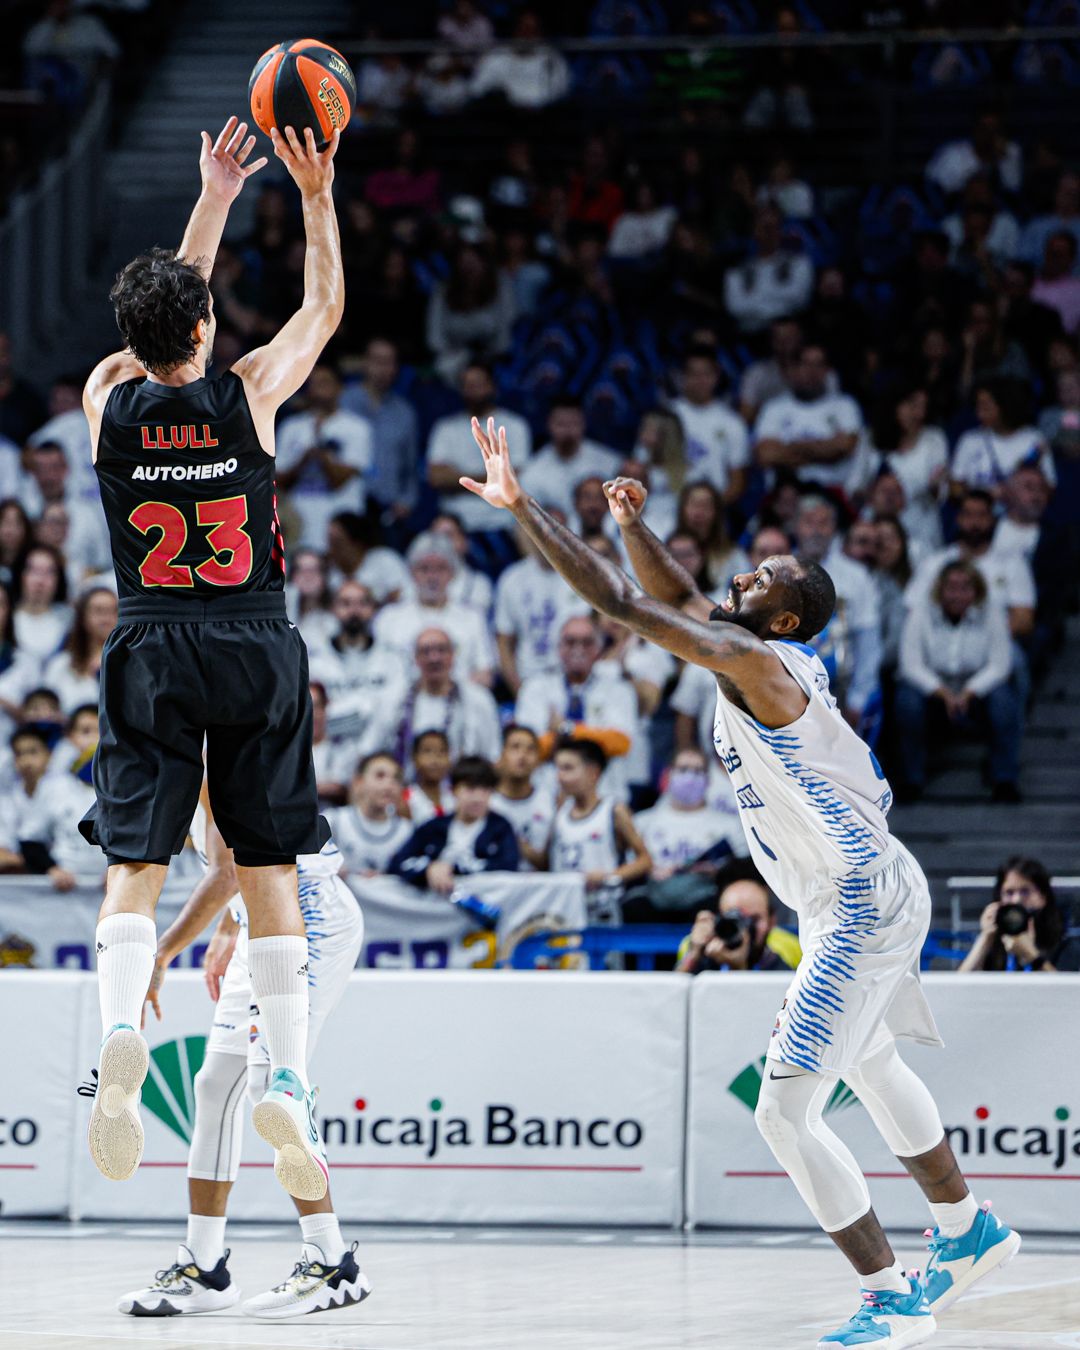 Sergio Llull enters ACB's top 5 historic three-point shooters 